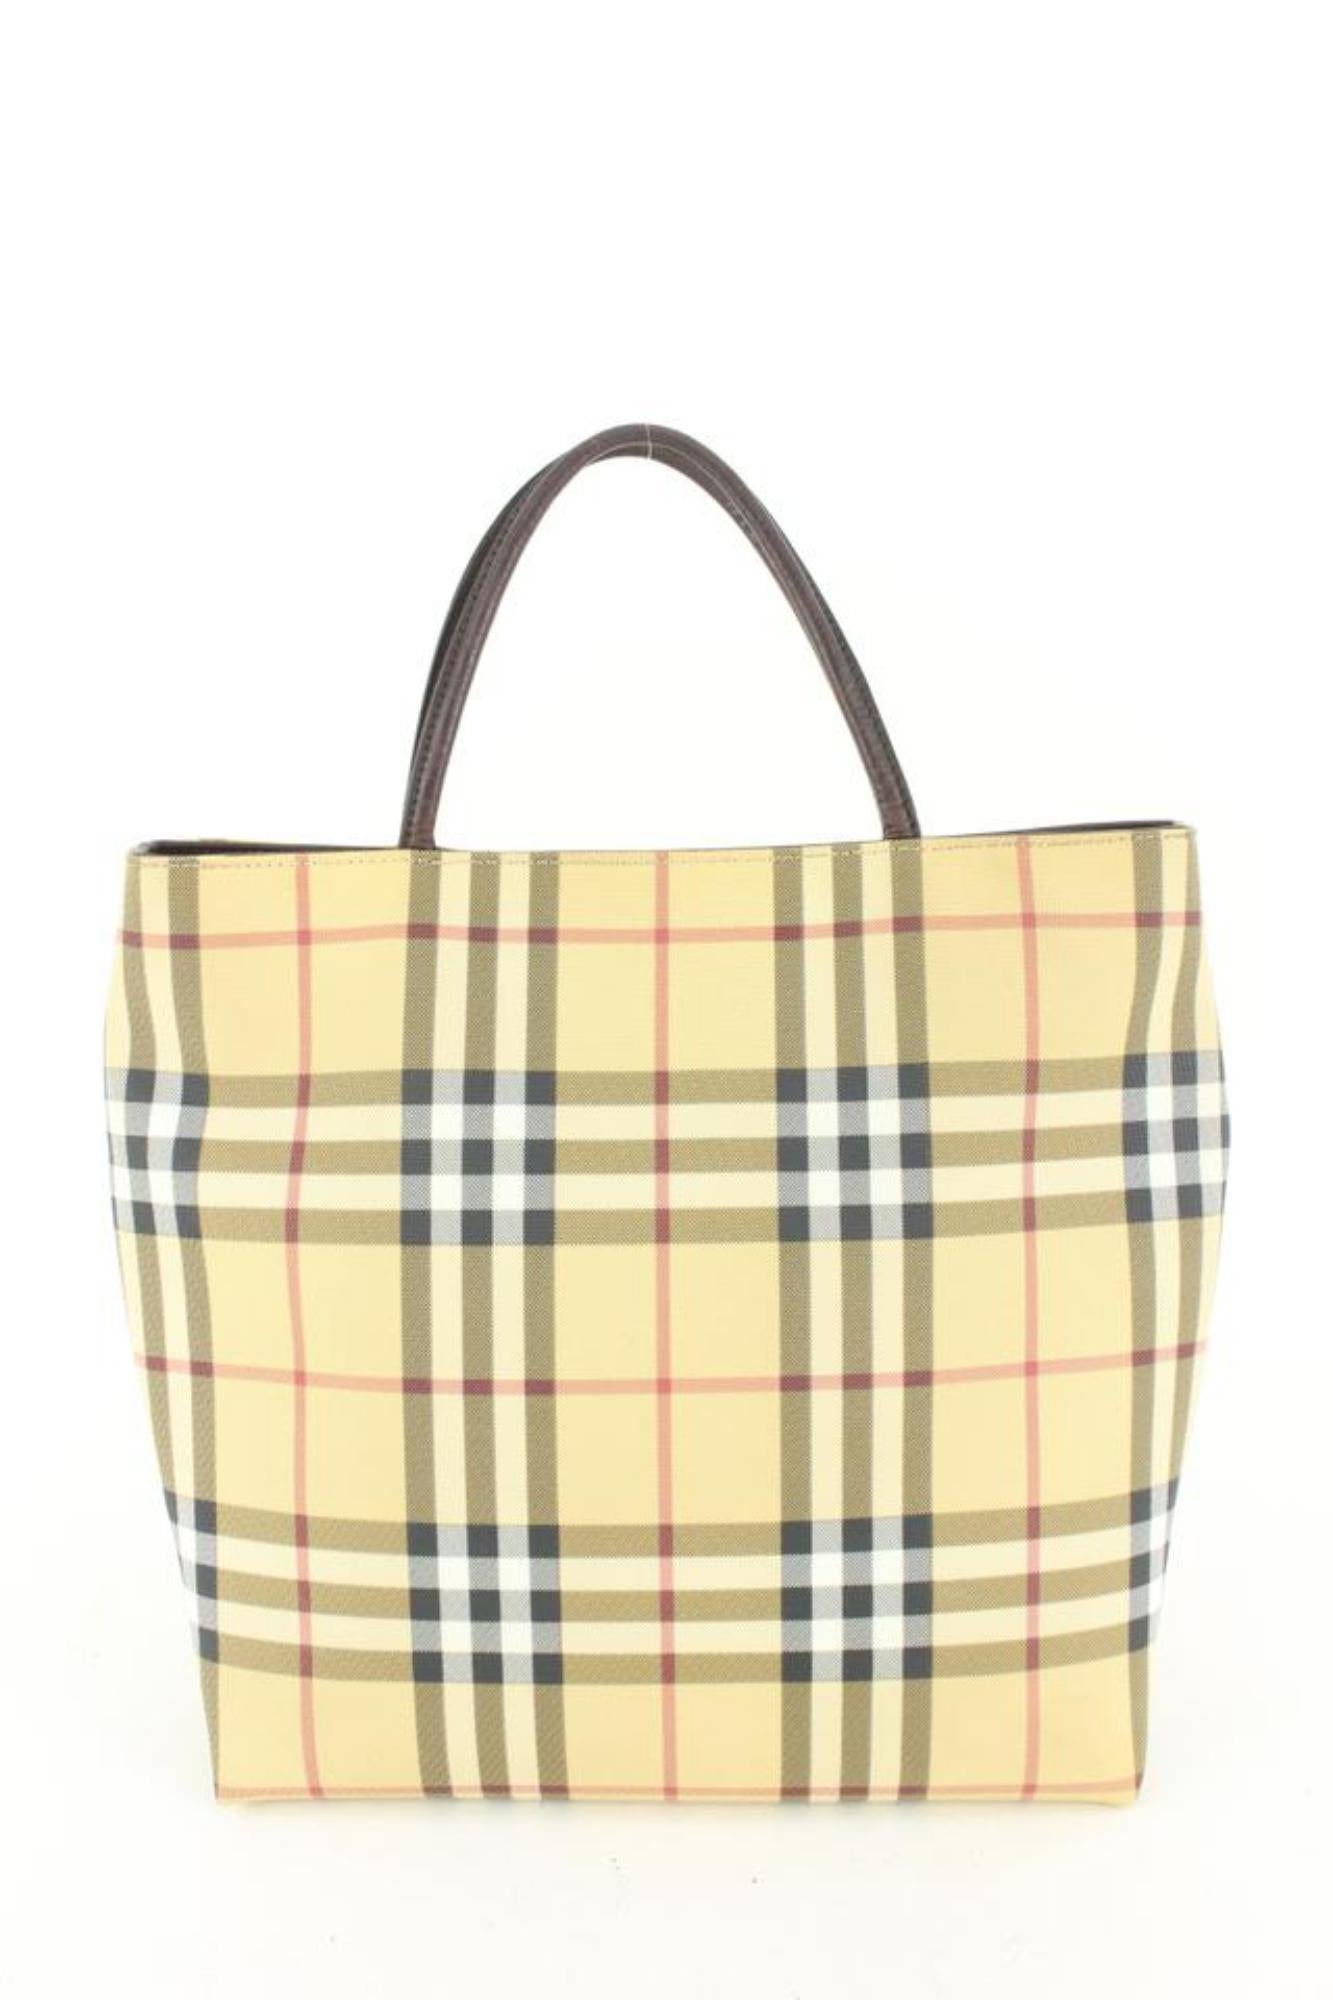 Burberry Coated Canvas Nova Check Shopper Tote Bag 75b429s In Good Condition In Dix hills, NY